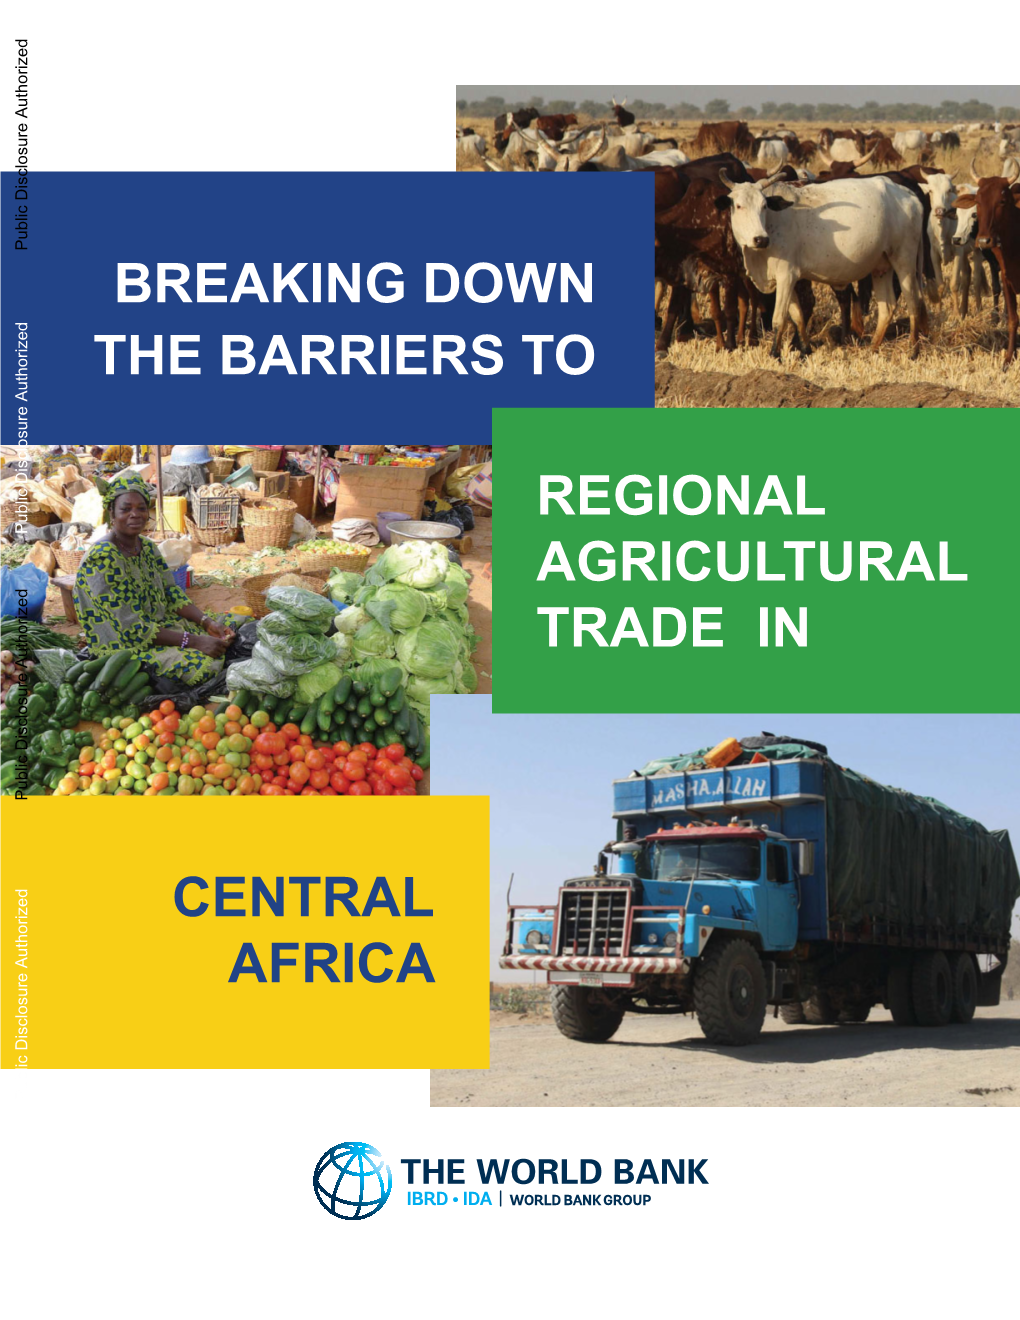 Breaking Down the Barriers to Central Africa Regional